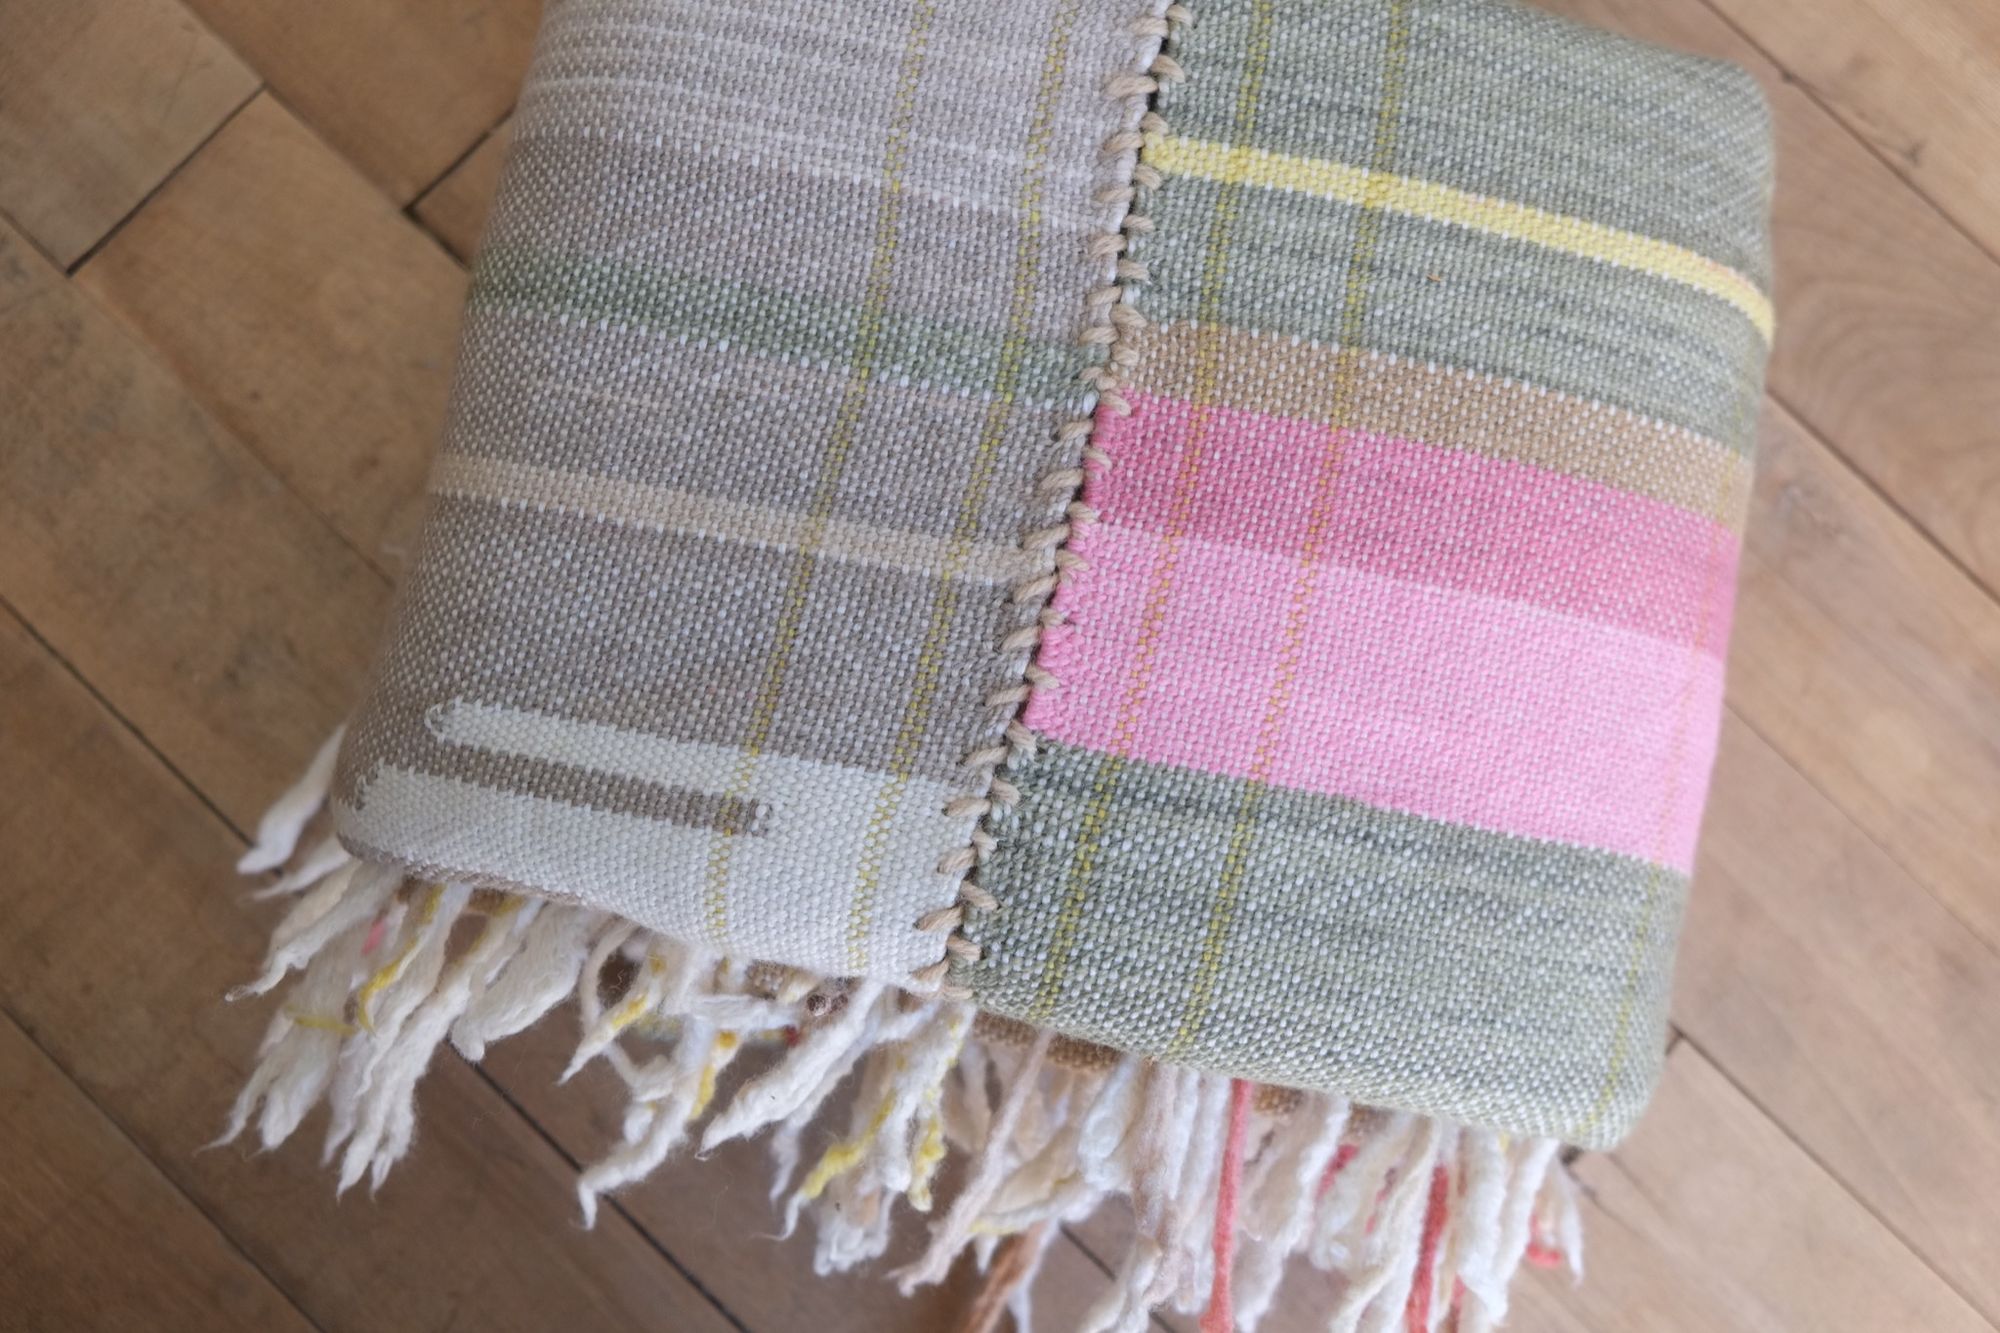 Handwoven Naturally Dyed Merino Ancient Dialogue Blanket laying on a wooden floor